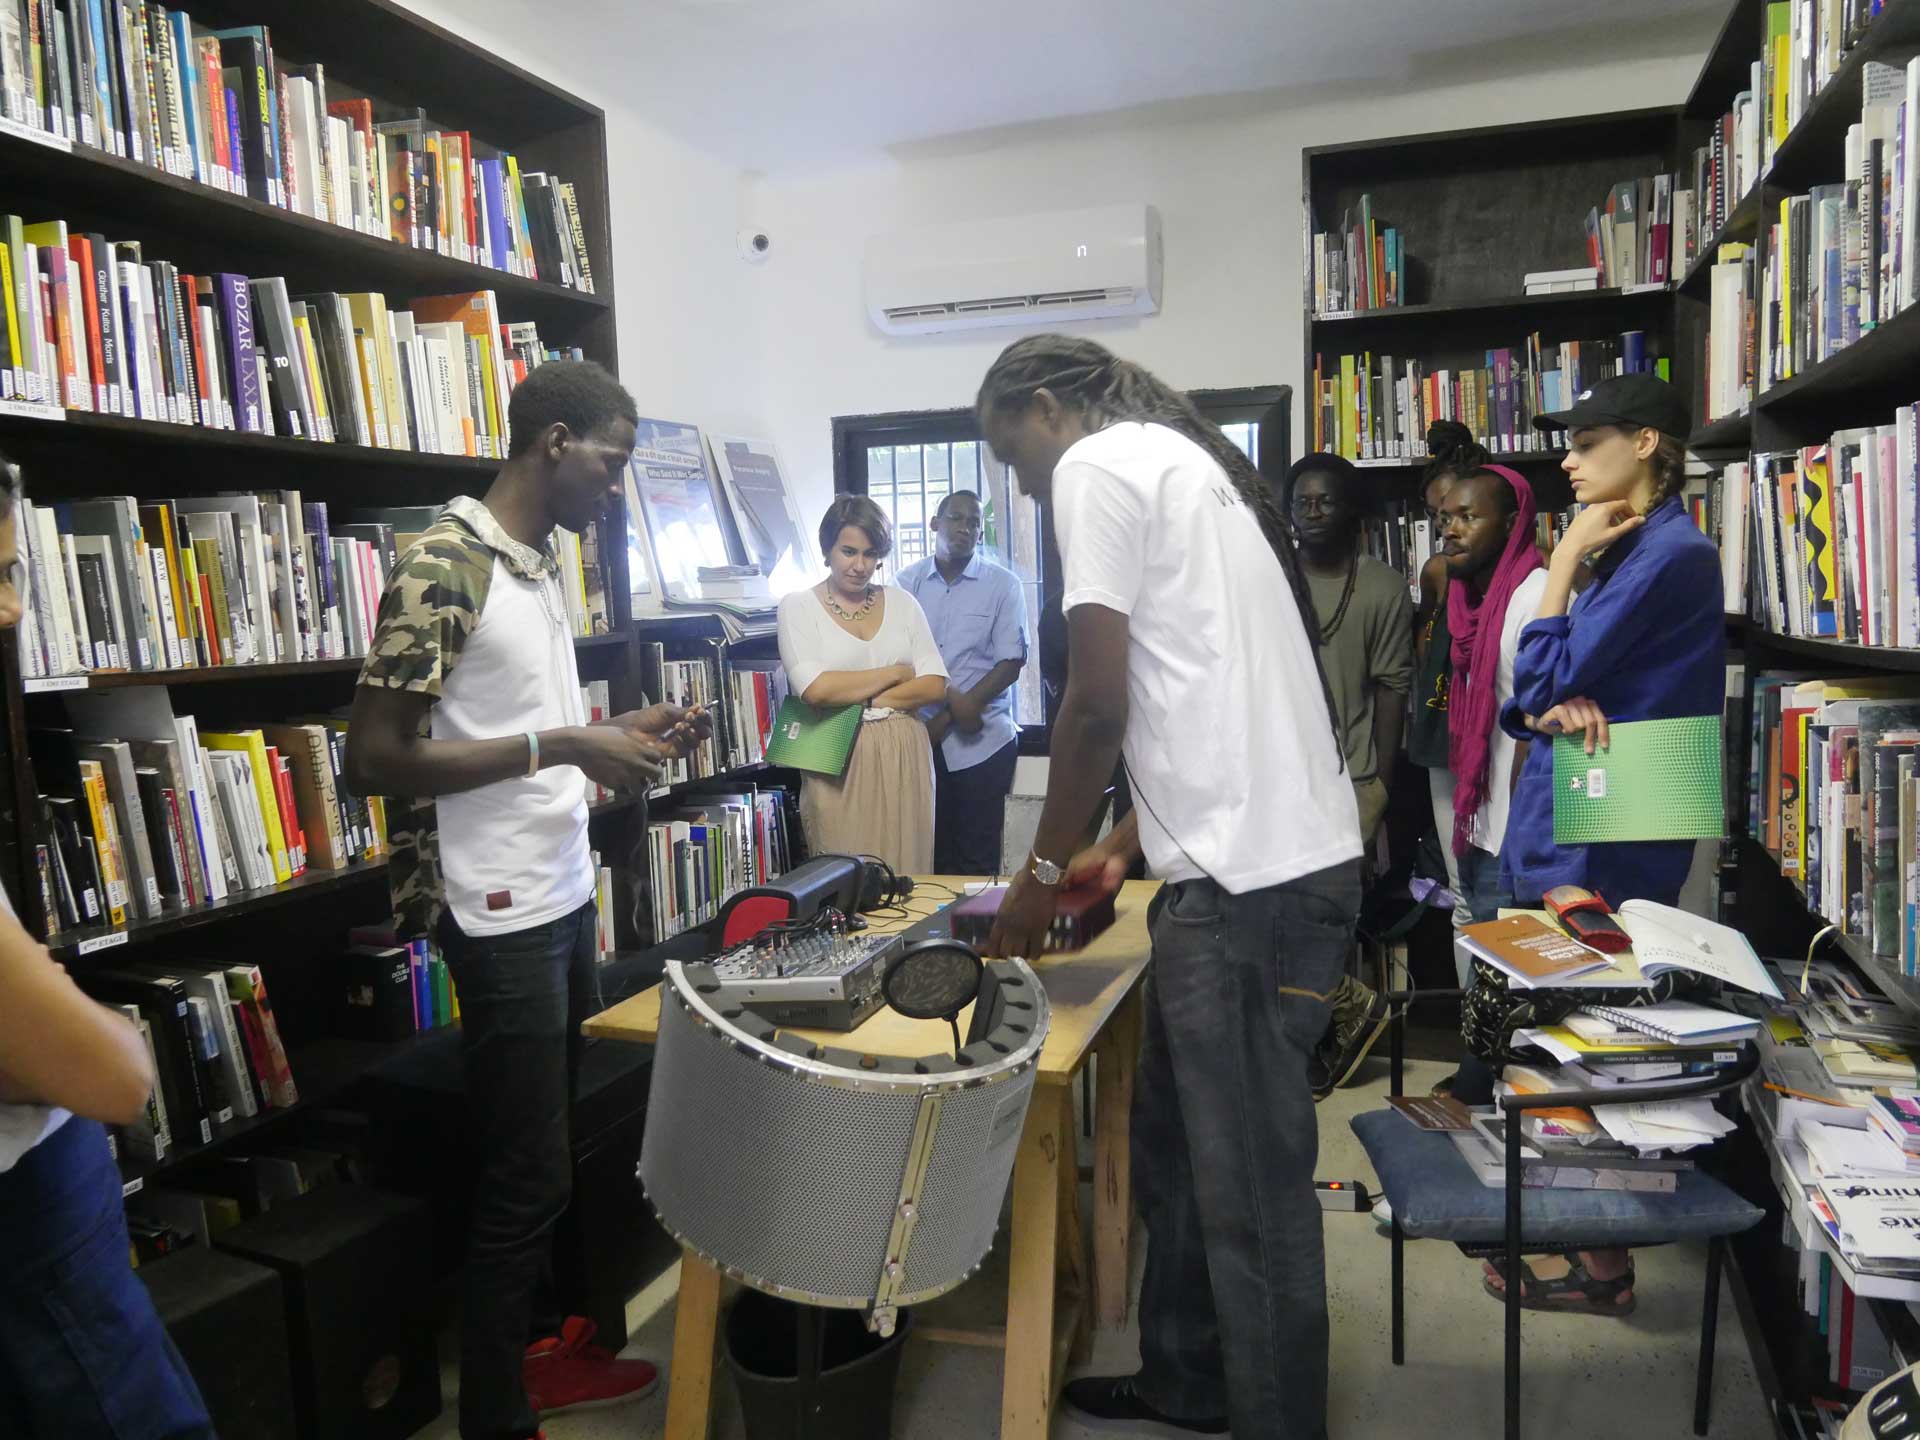 People standing in a library with sound equipment